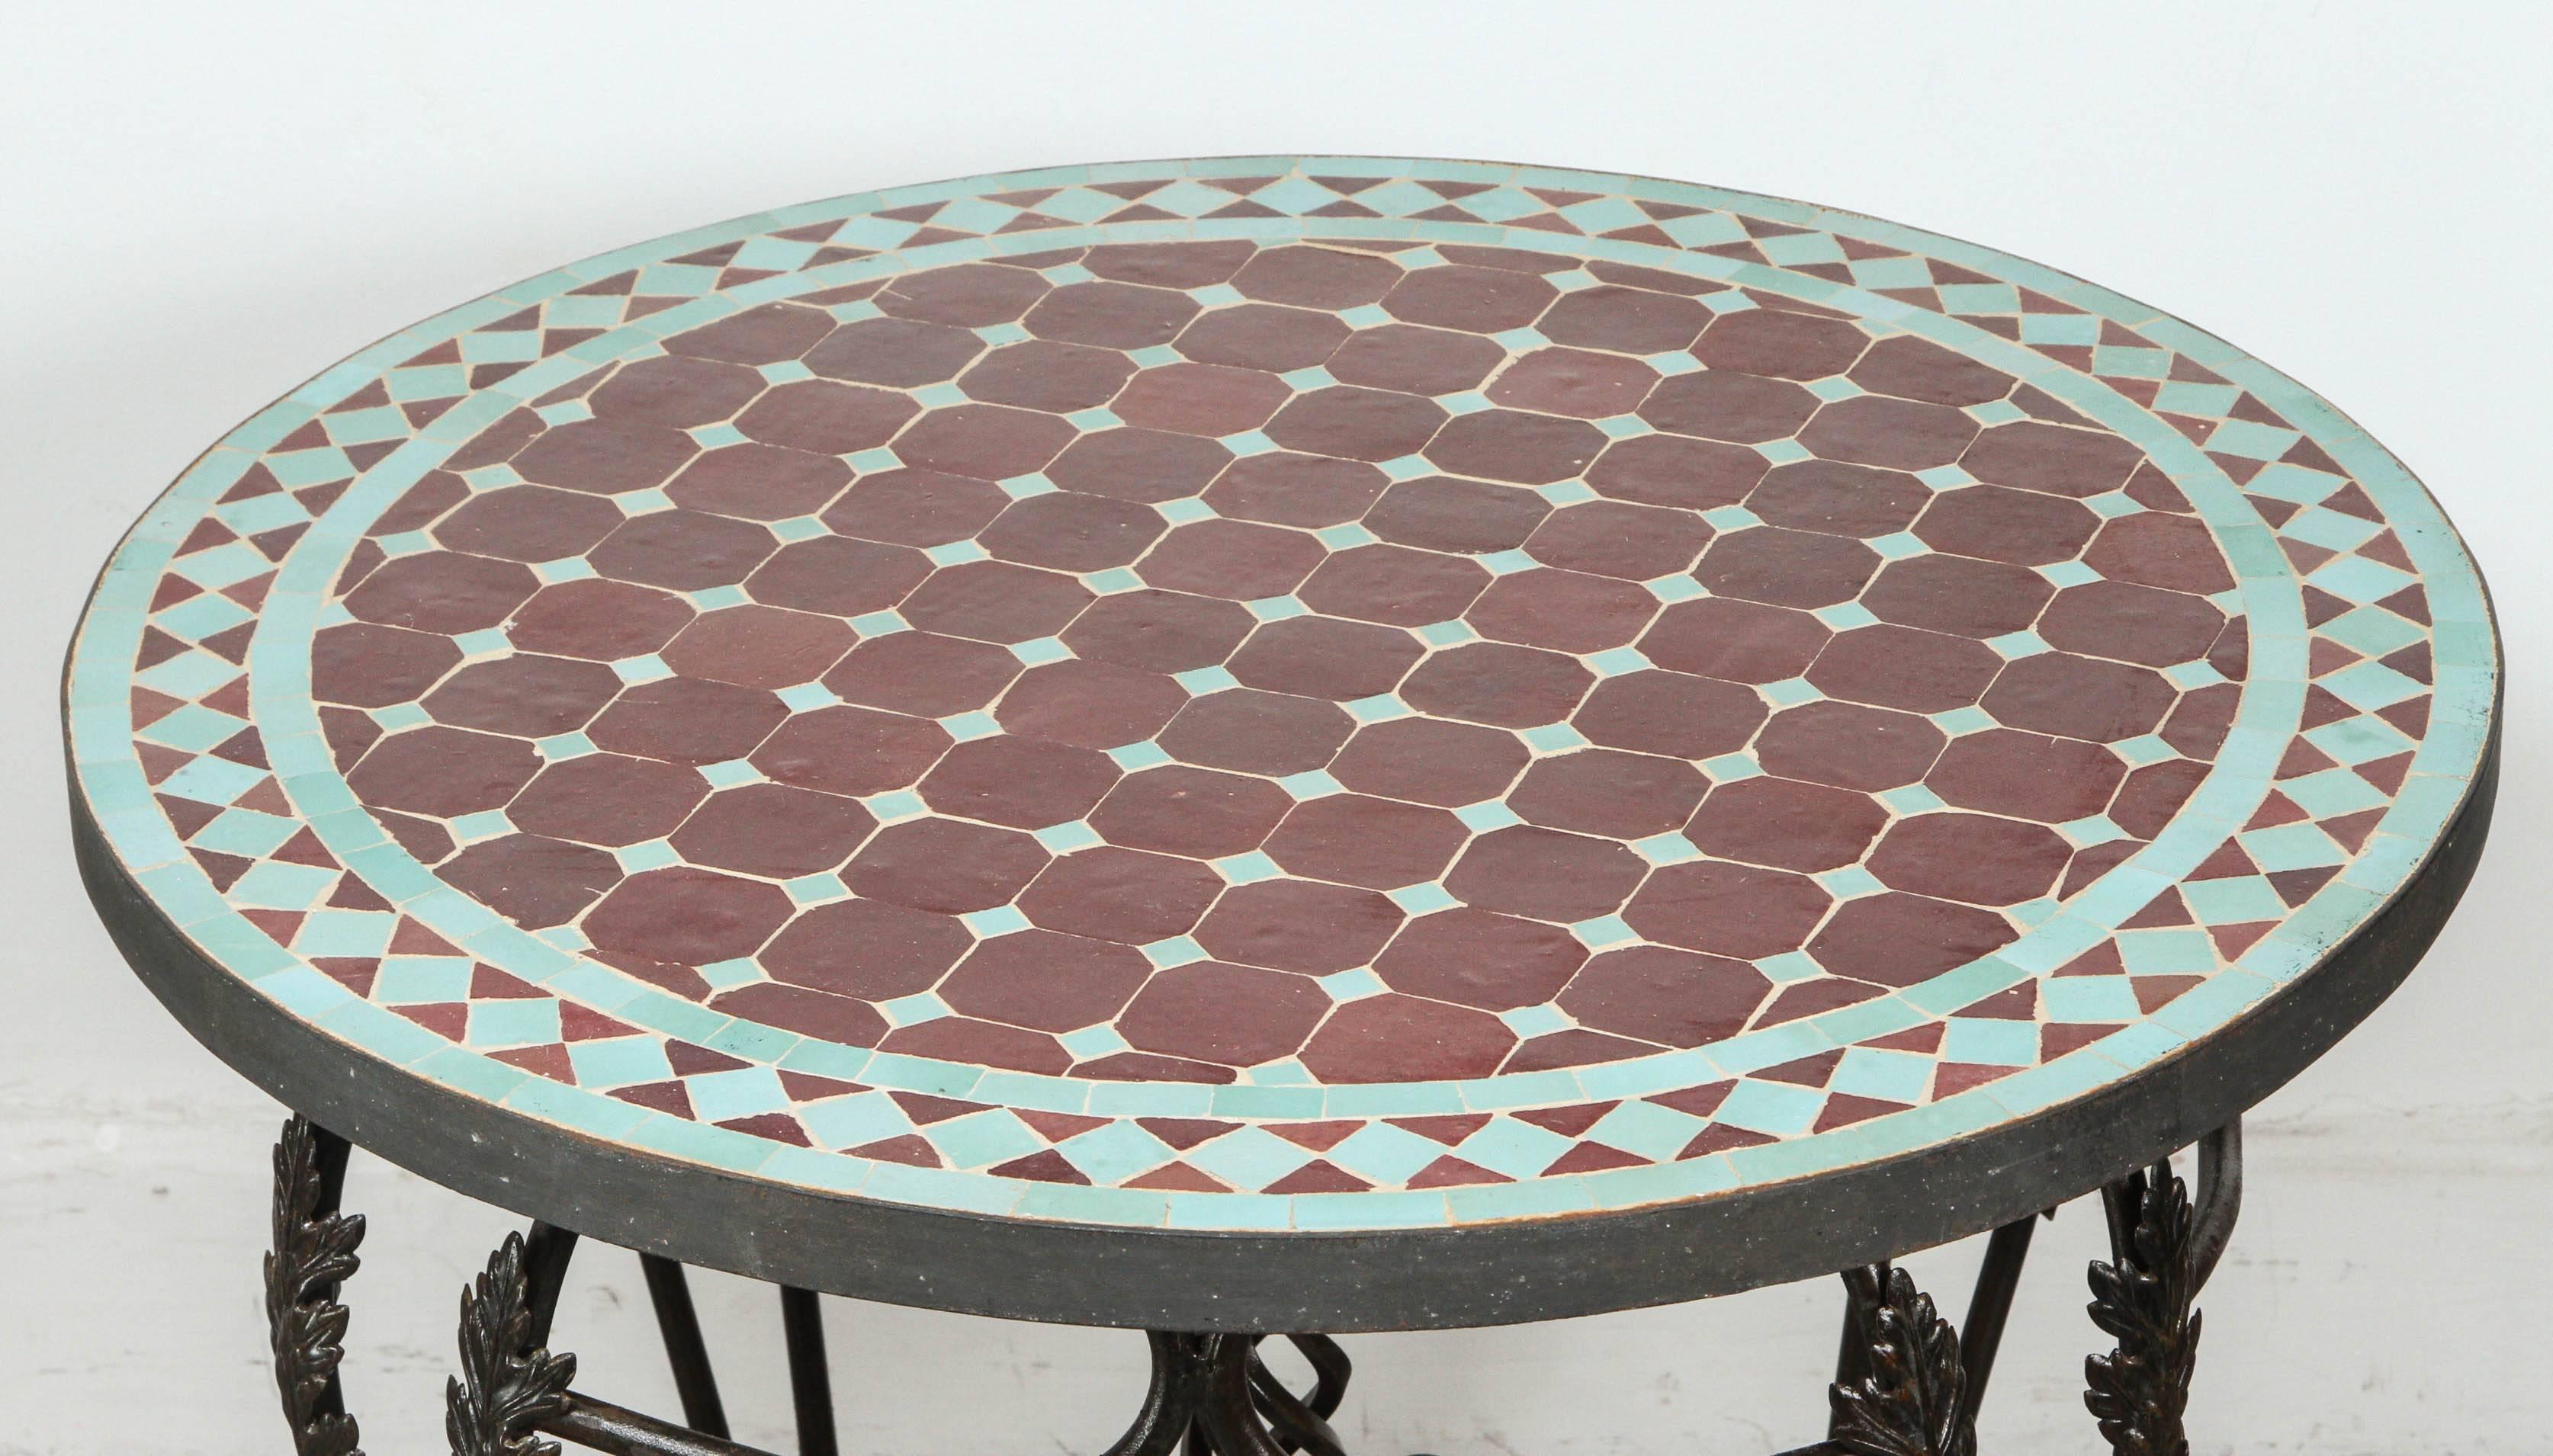 Moroccan Round Mosaic Tile Side Table Indoor or Outdoor In Good Condition In North Hollywood, CA